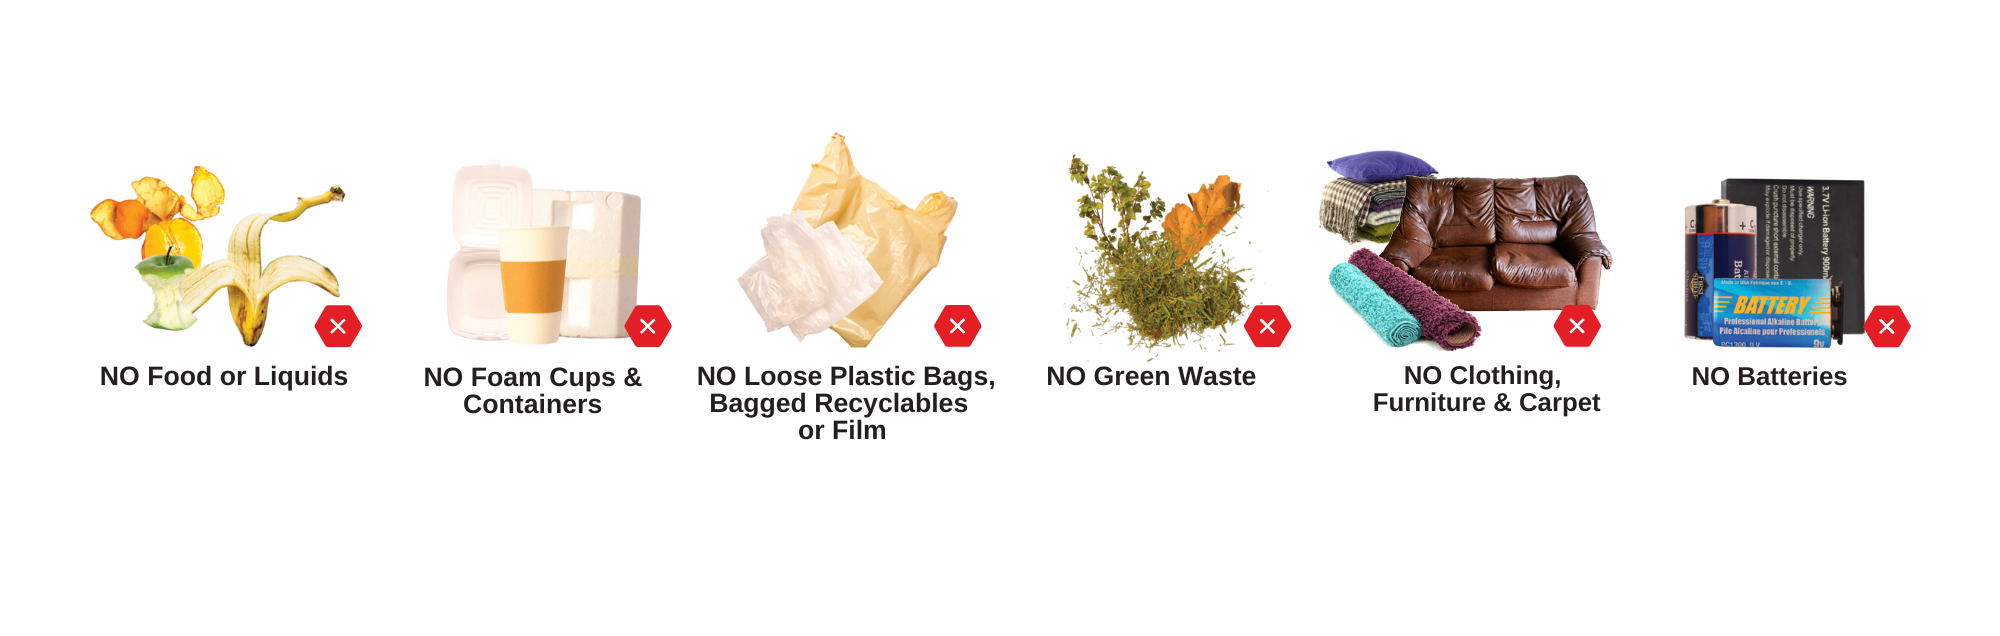 Examples of non-recycle images, in order from left to right: No food or liquids, no foam cups & containers, no loose plastic bags, bagged recyclables or film, no green waste, no clothing and furniture, and carpet, no batteries